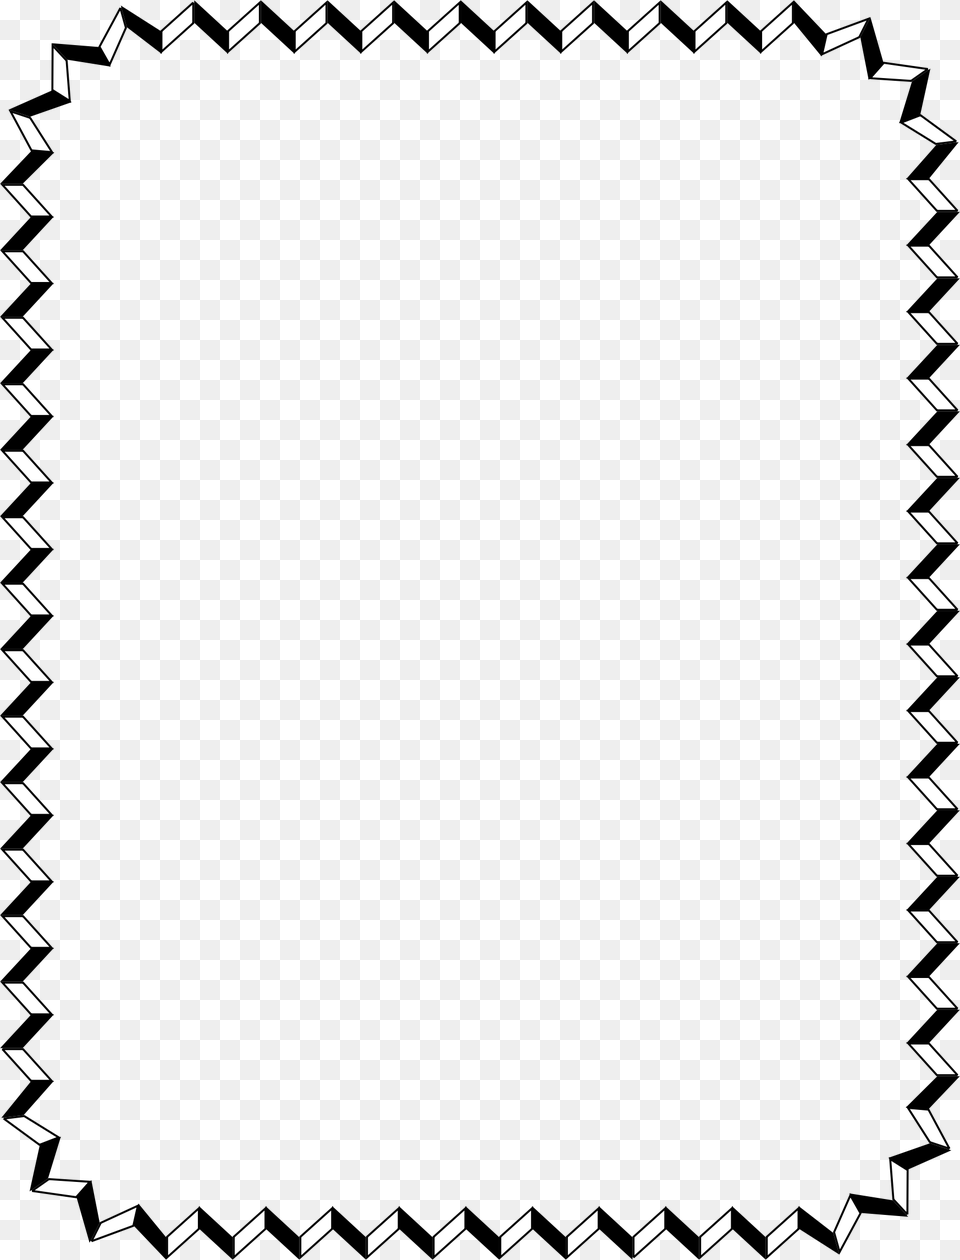 Zigzag Border Icons, Home Decor, Pattern Png Image